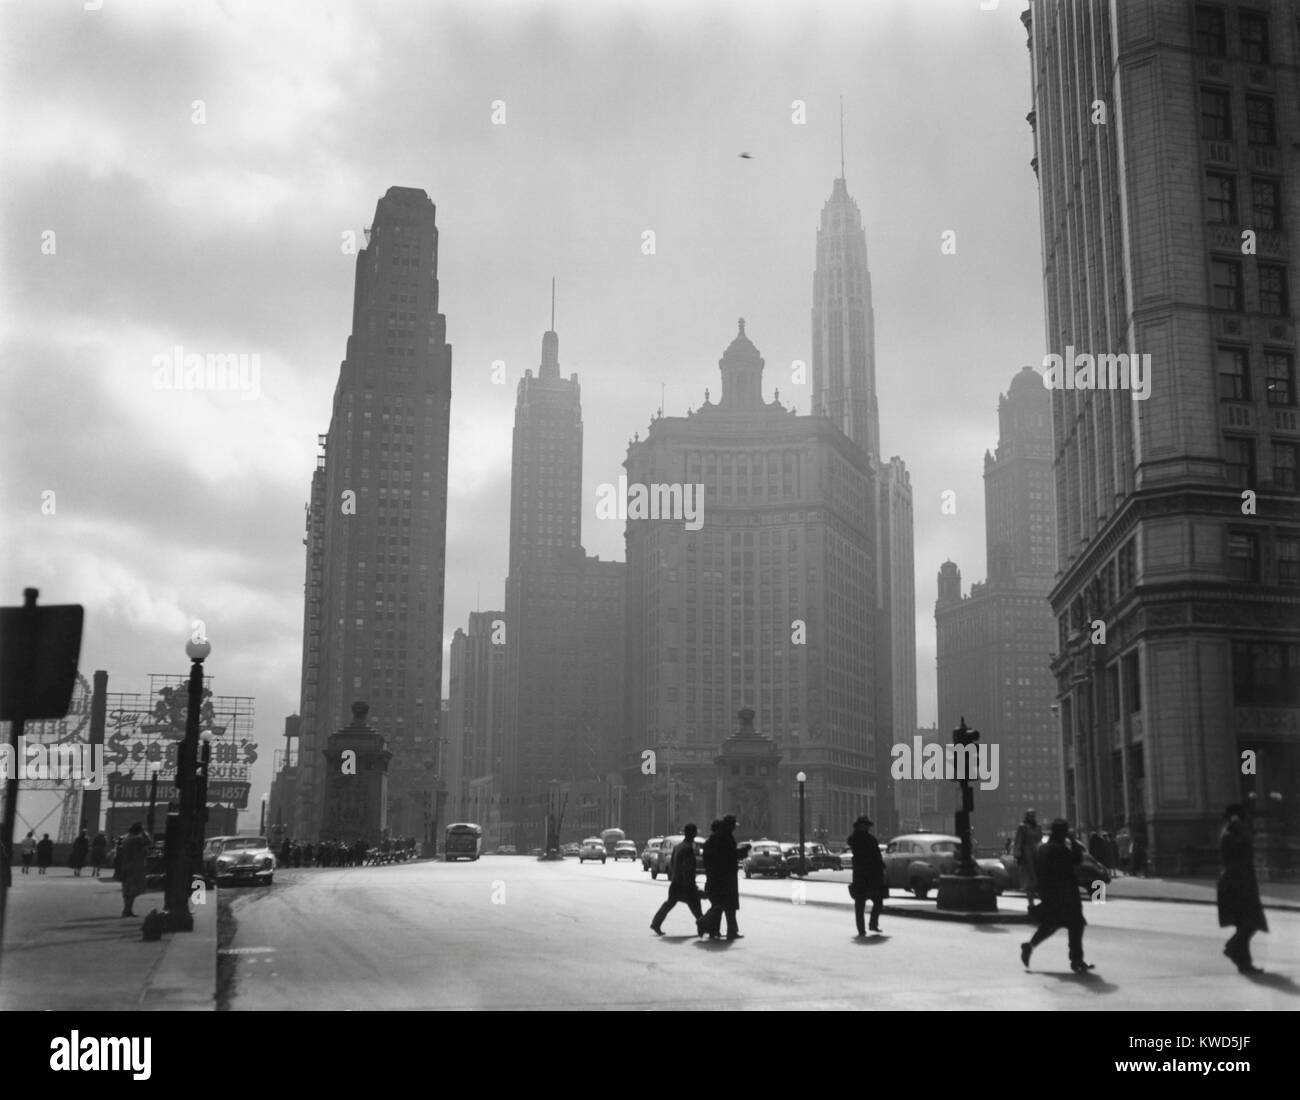 Mid-century Chicago, looking down Michigan Avenue, 1951. Buildings shown are (L-R) #333 No. Michigan Avenue; Carbon and Carbide Building; London Guarantee & Accident Building, Lincoln Tower; Pure Oil; and Wrigley Building. By Oliver E. Pfieffer, March 1951. (BSLOC 2014 13 194) Stock Photo